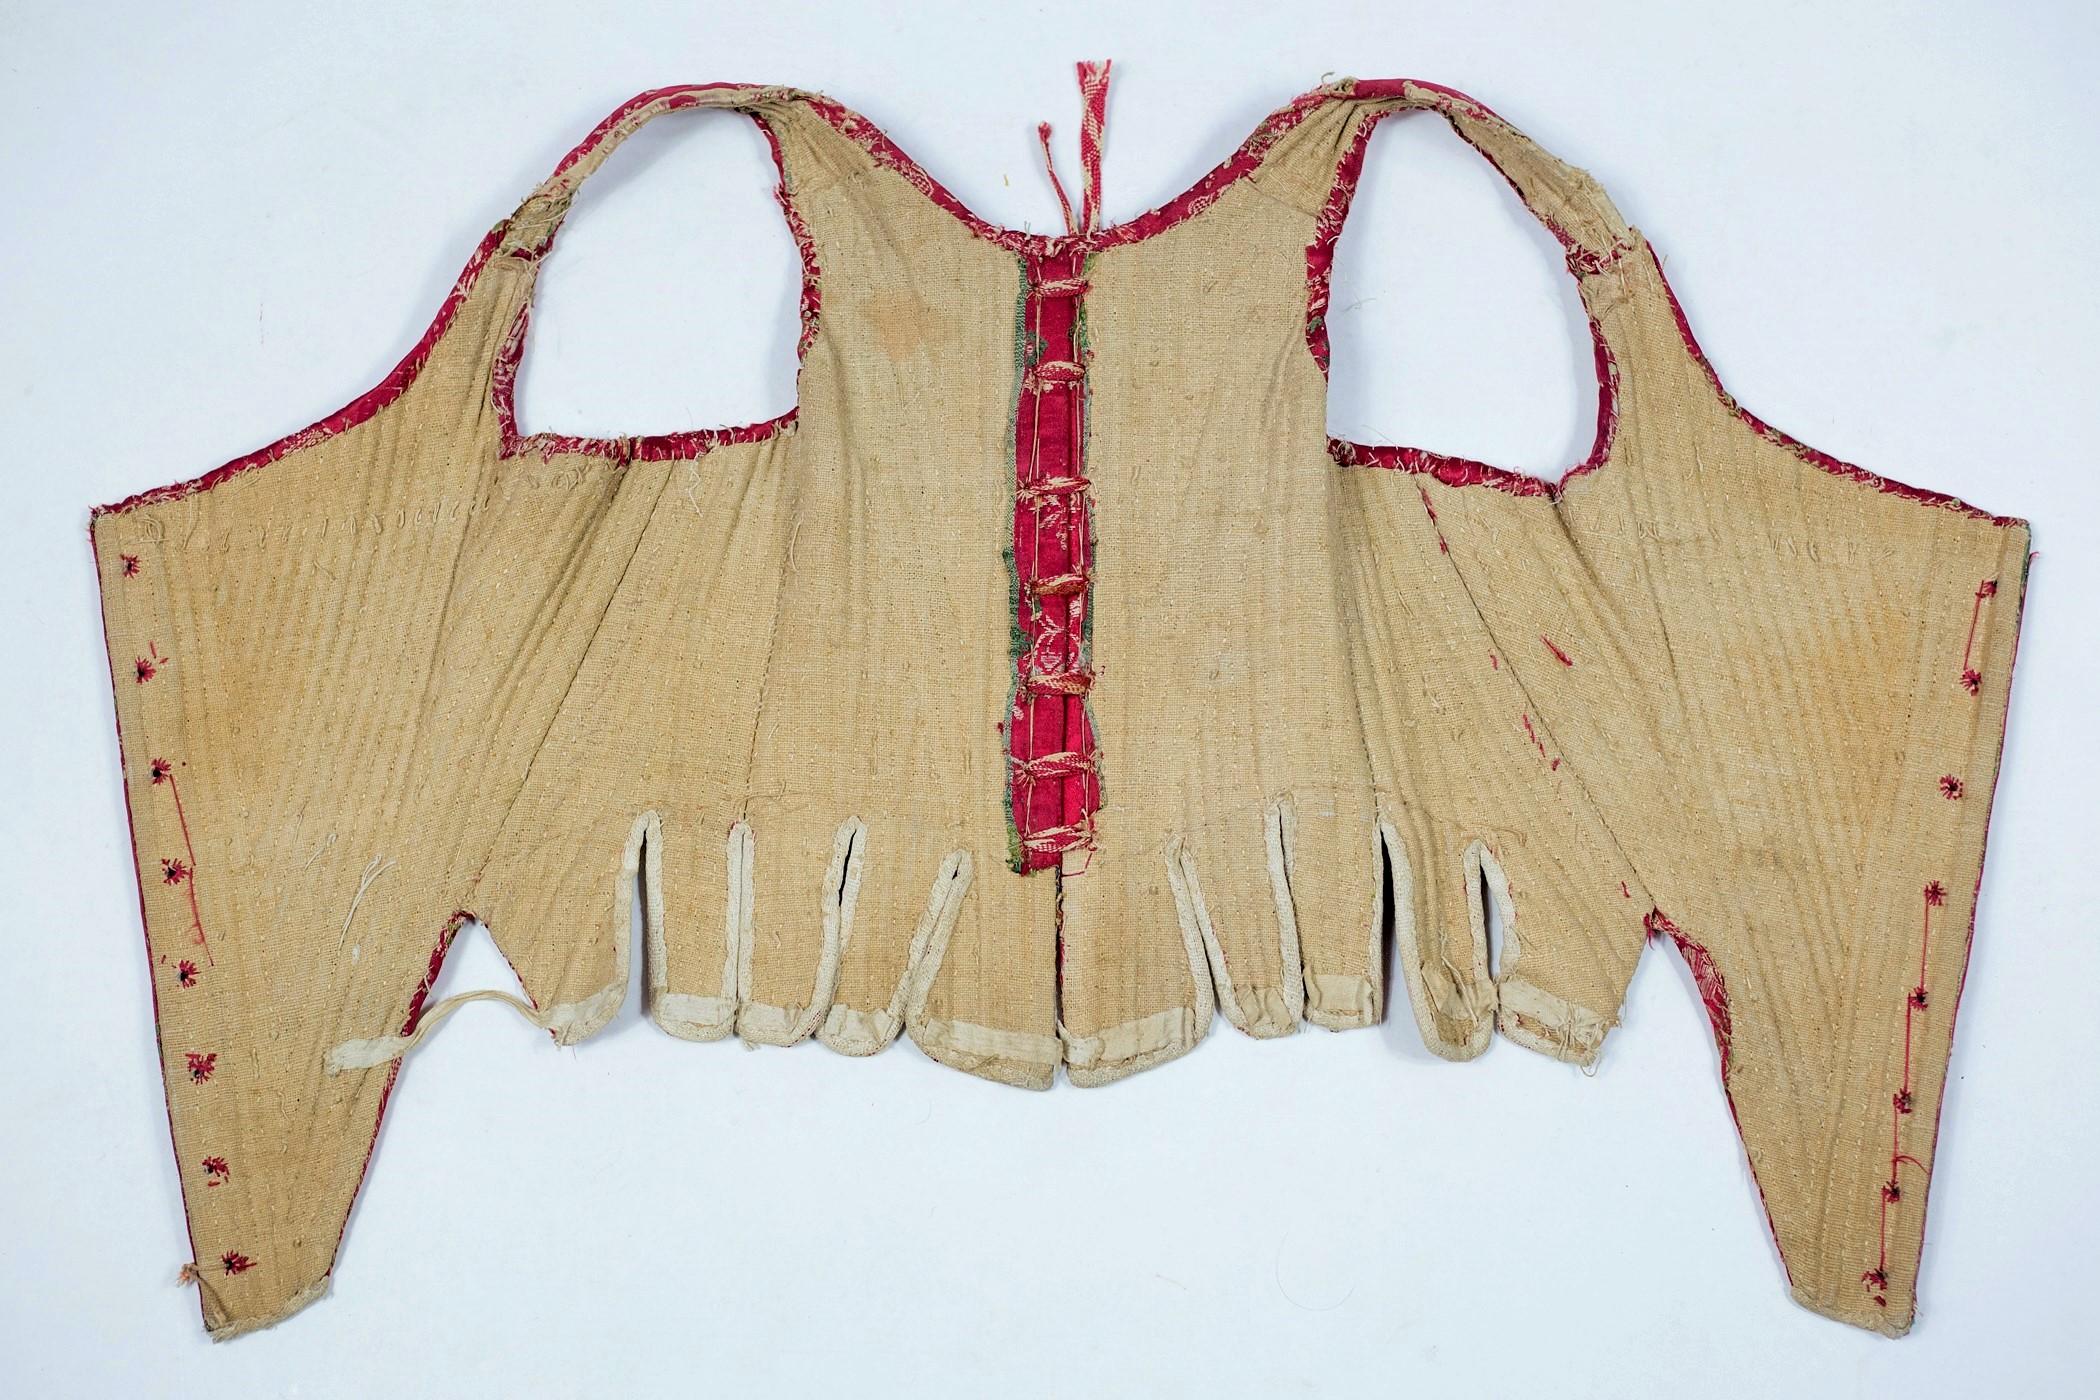 Louis XV period
France
Rigid body of Court with busk and eyelets in two laced parts, entirely ribbed with whalebone and reeds. Back in cherry edged satin (satin of 8) with floral decoration called 